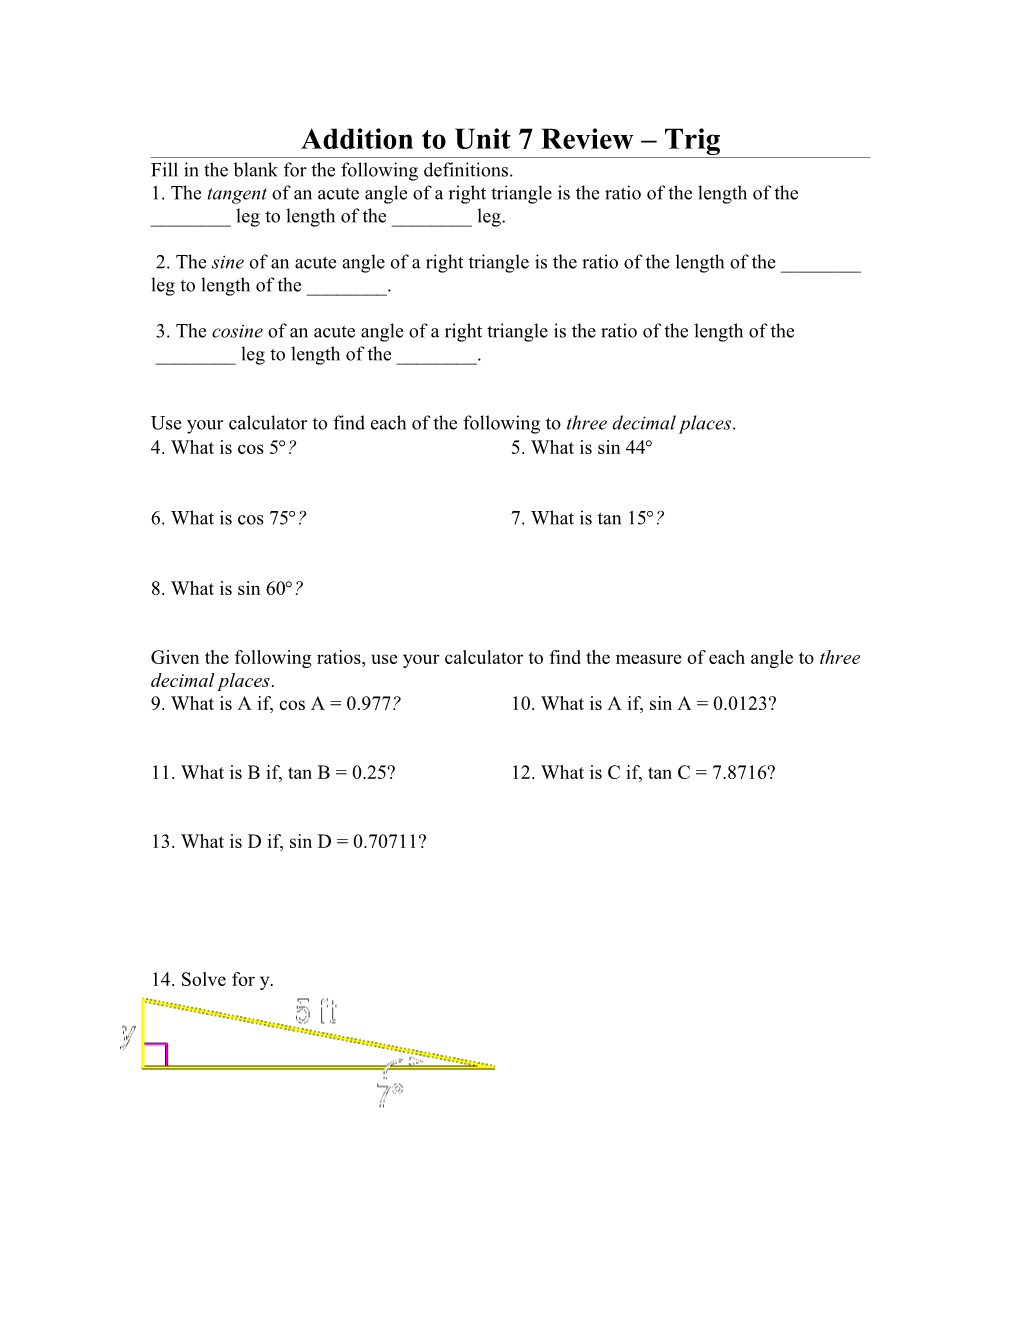 Addition to Unit 9 Review Trig